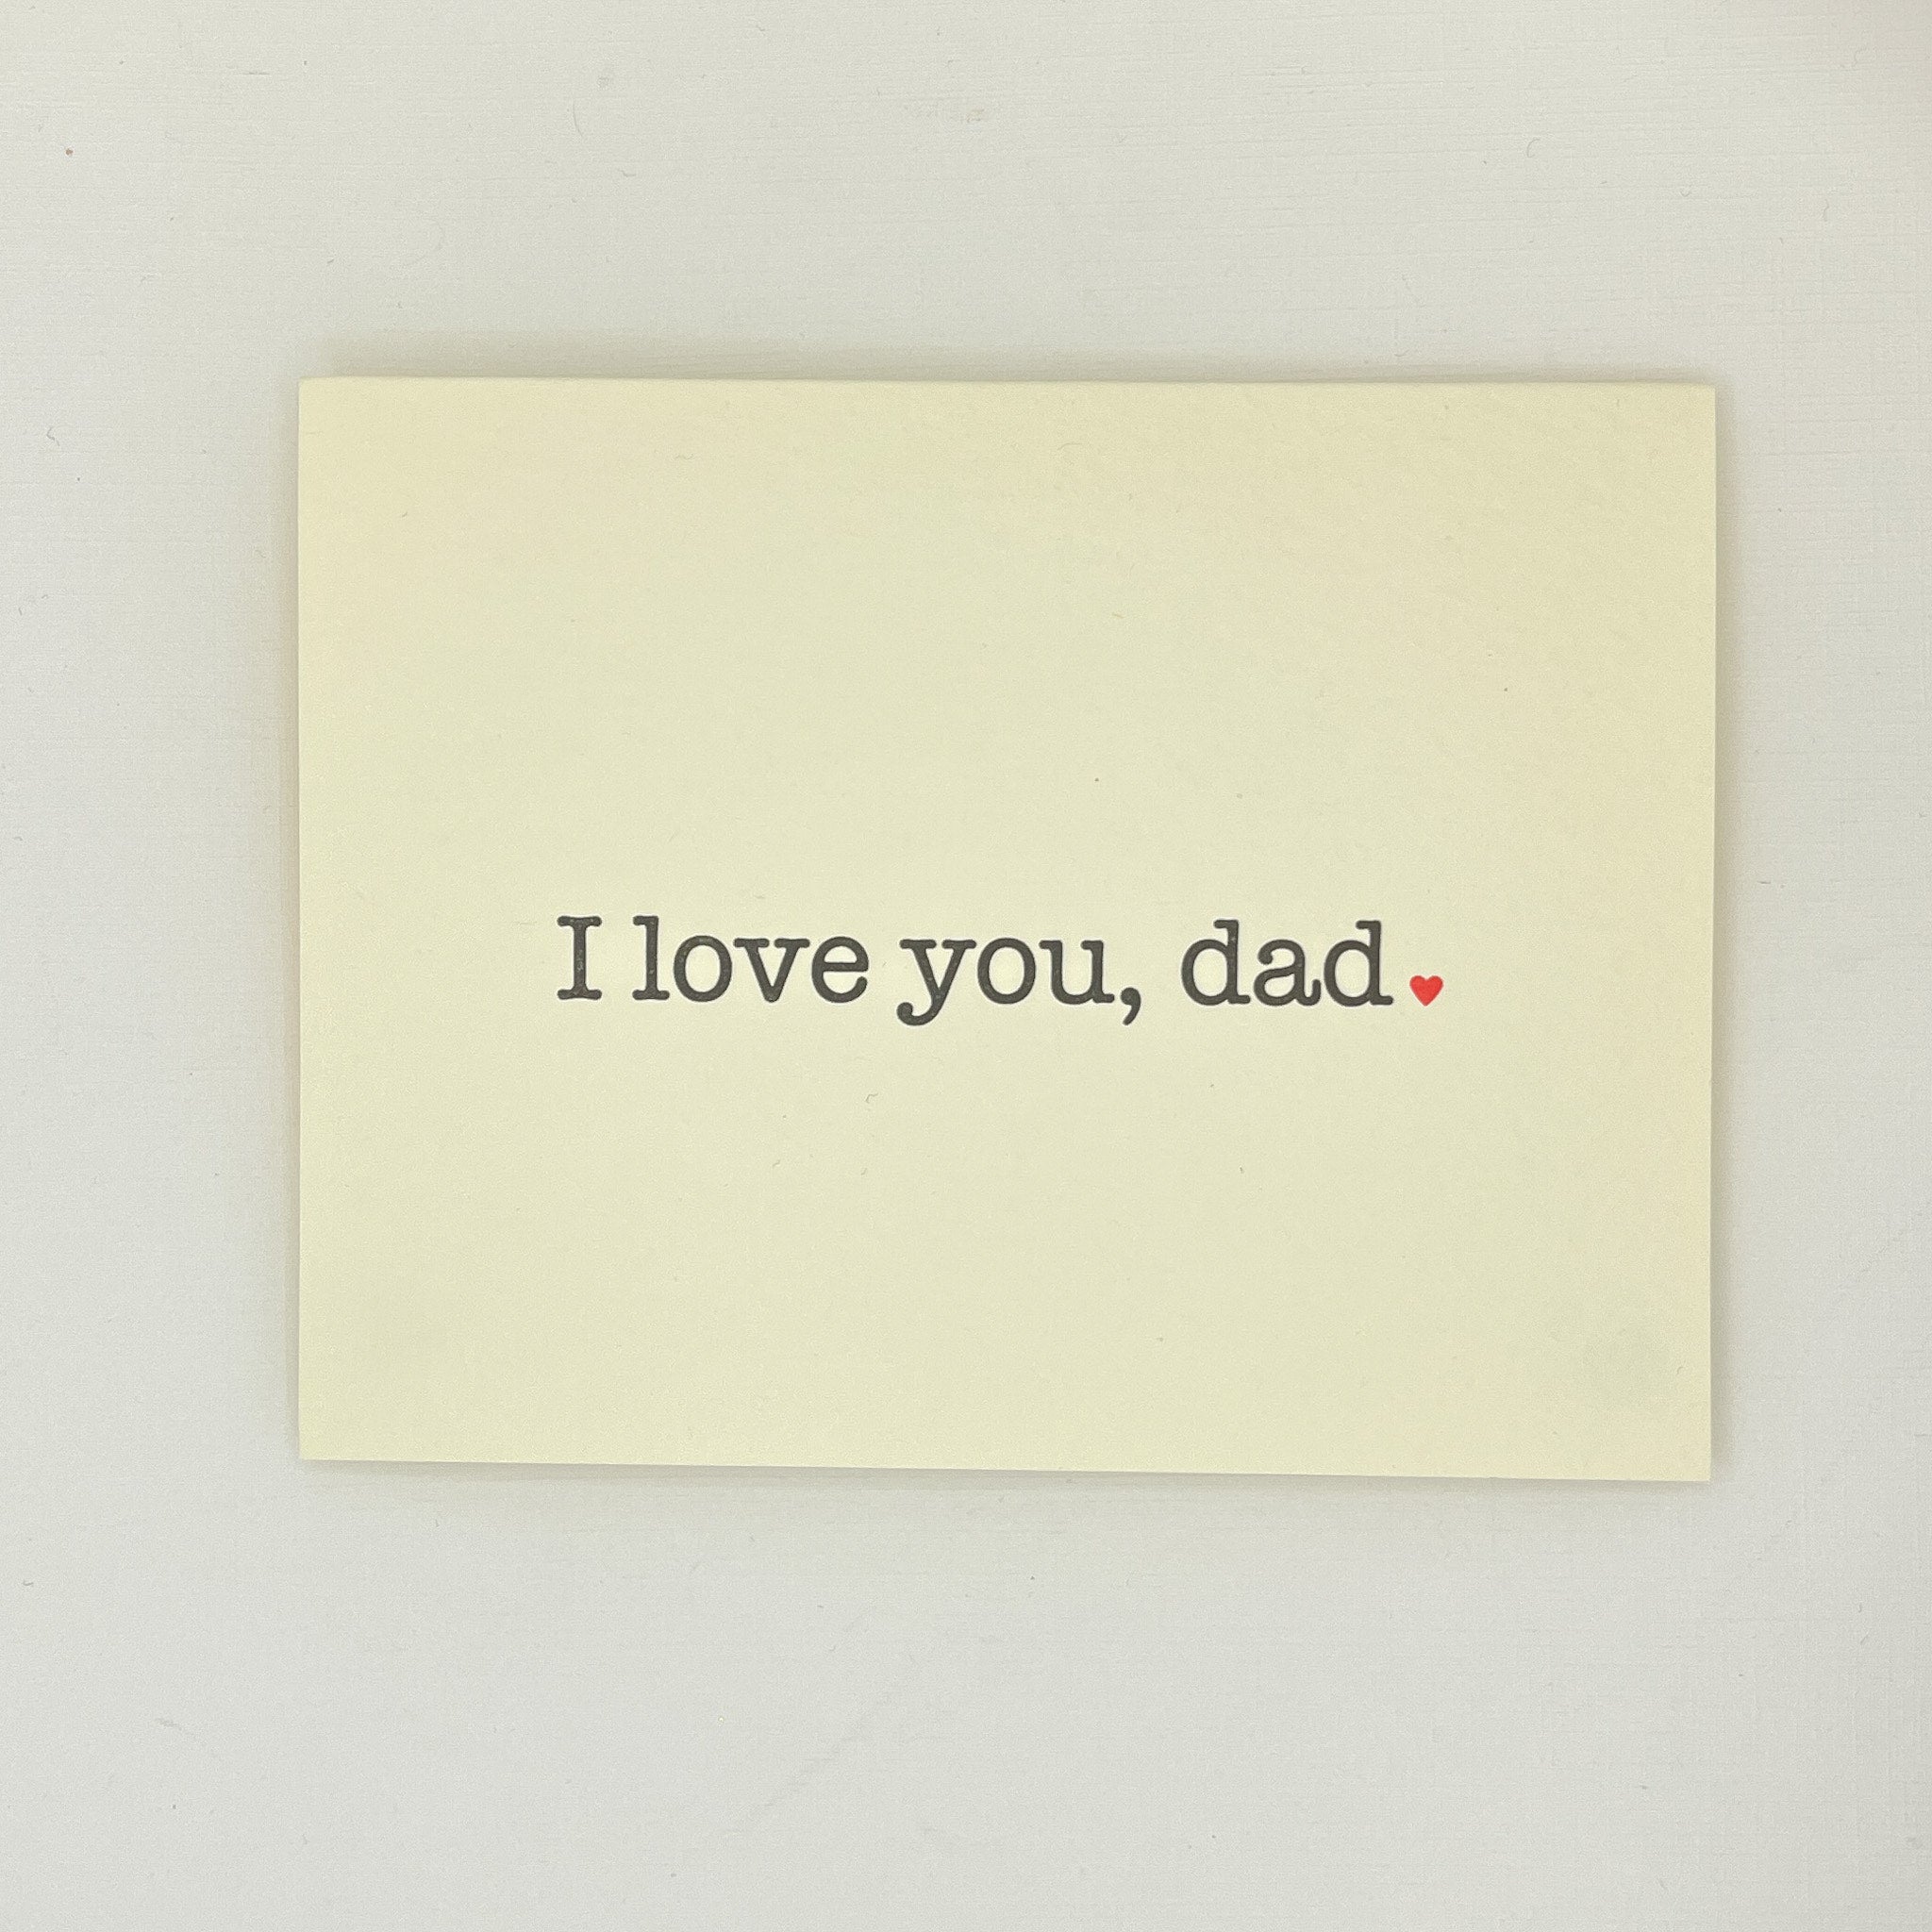 I love you, dad. Father's Day Card